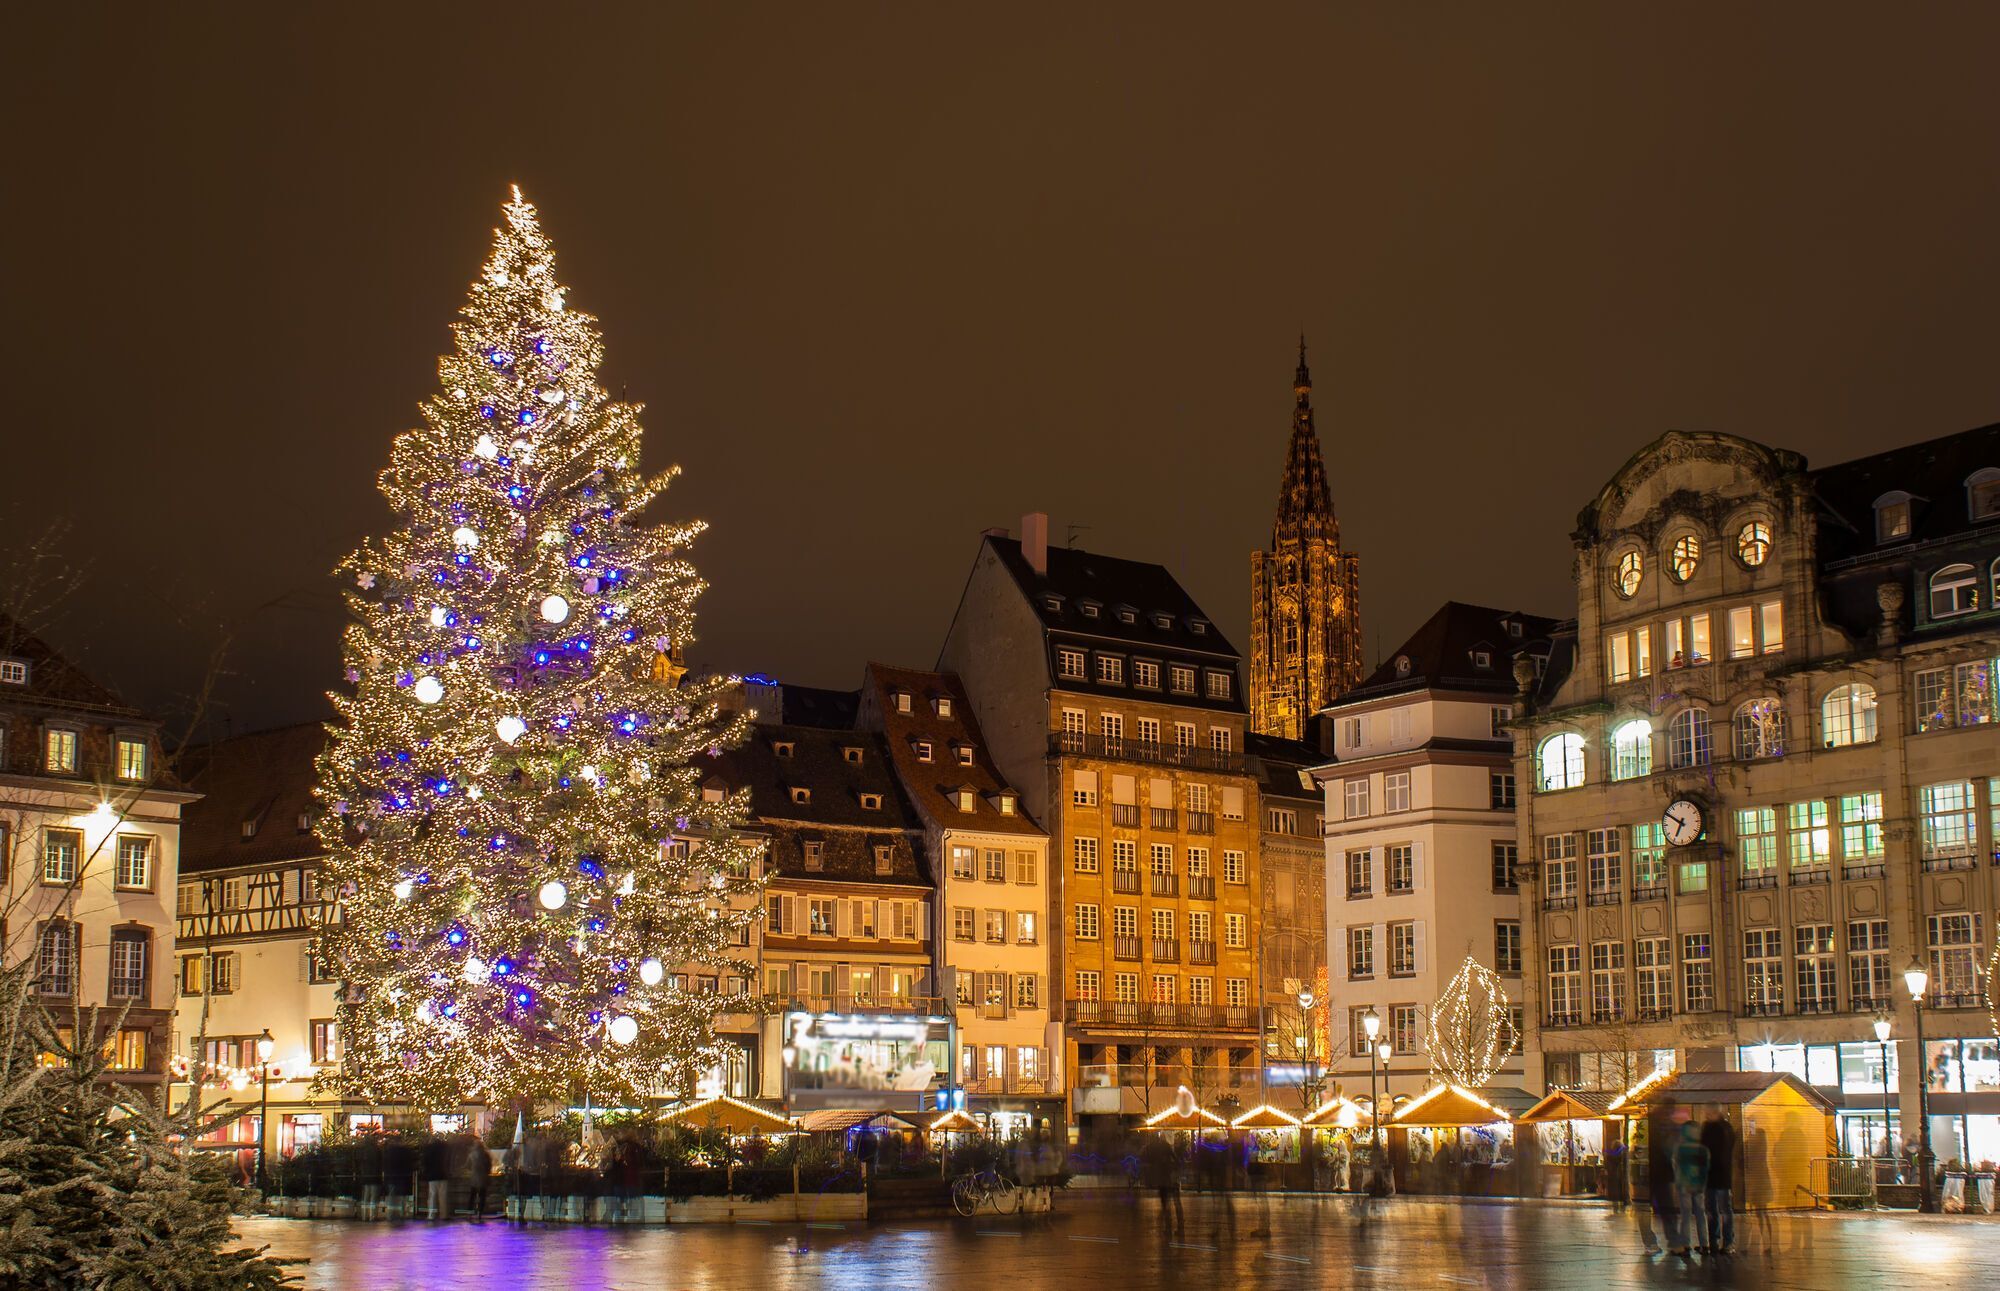 Strasbourg is considered the Christmas capital of Europe